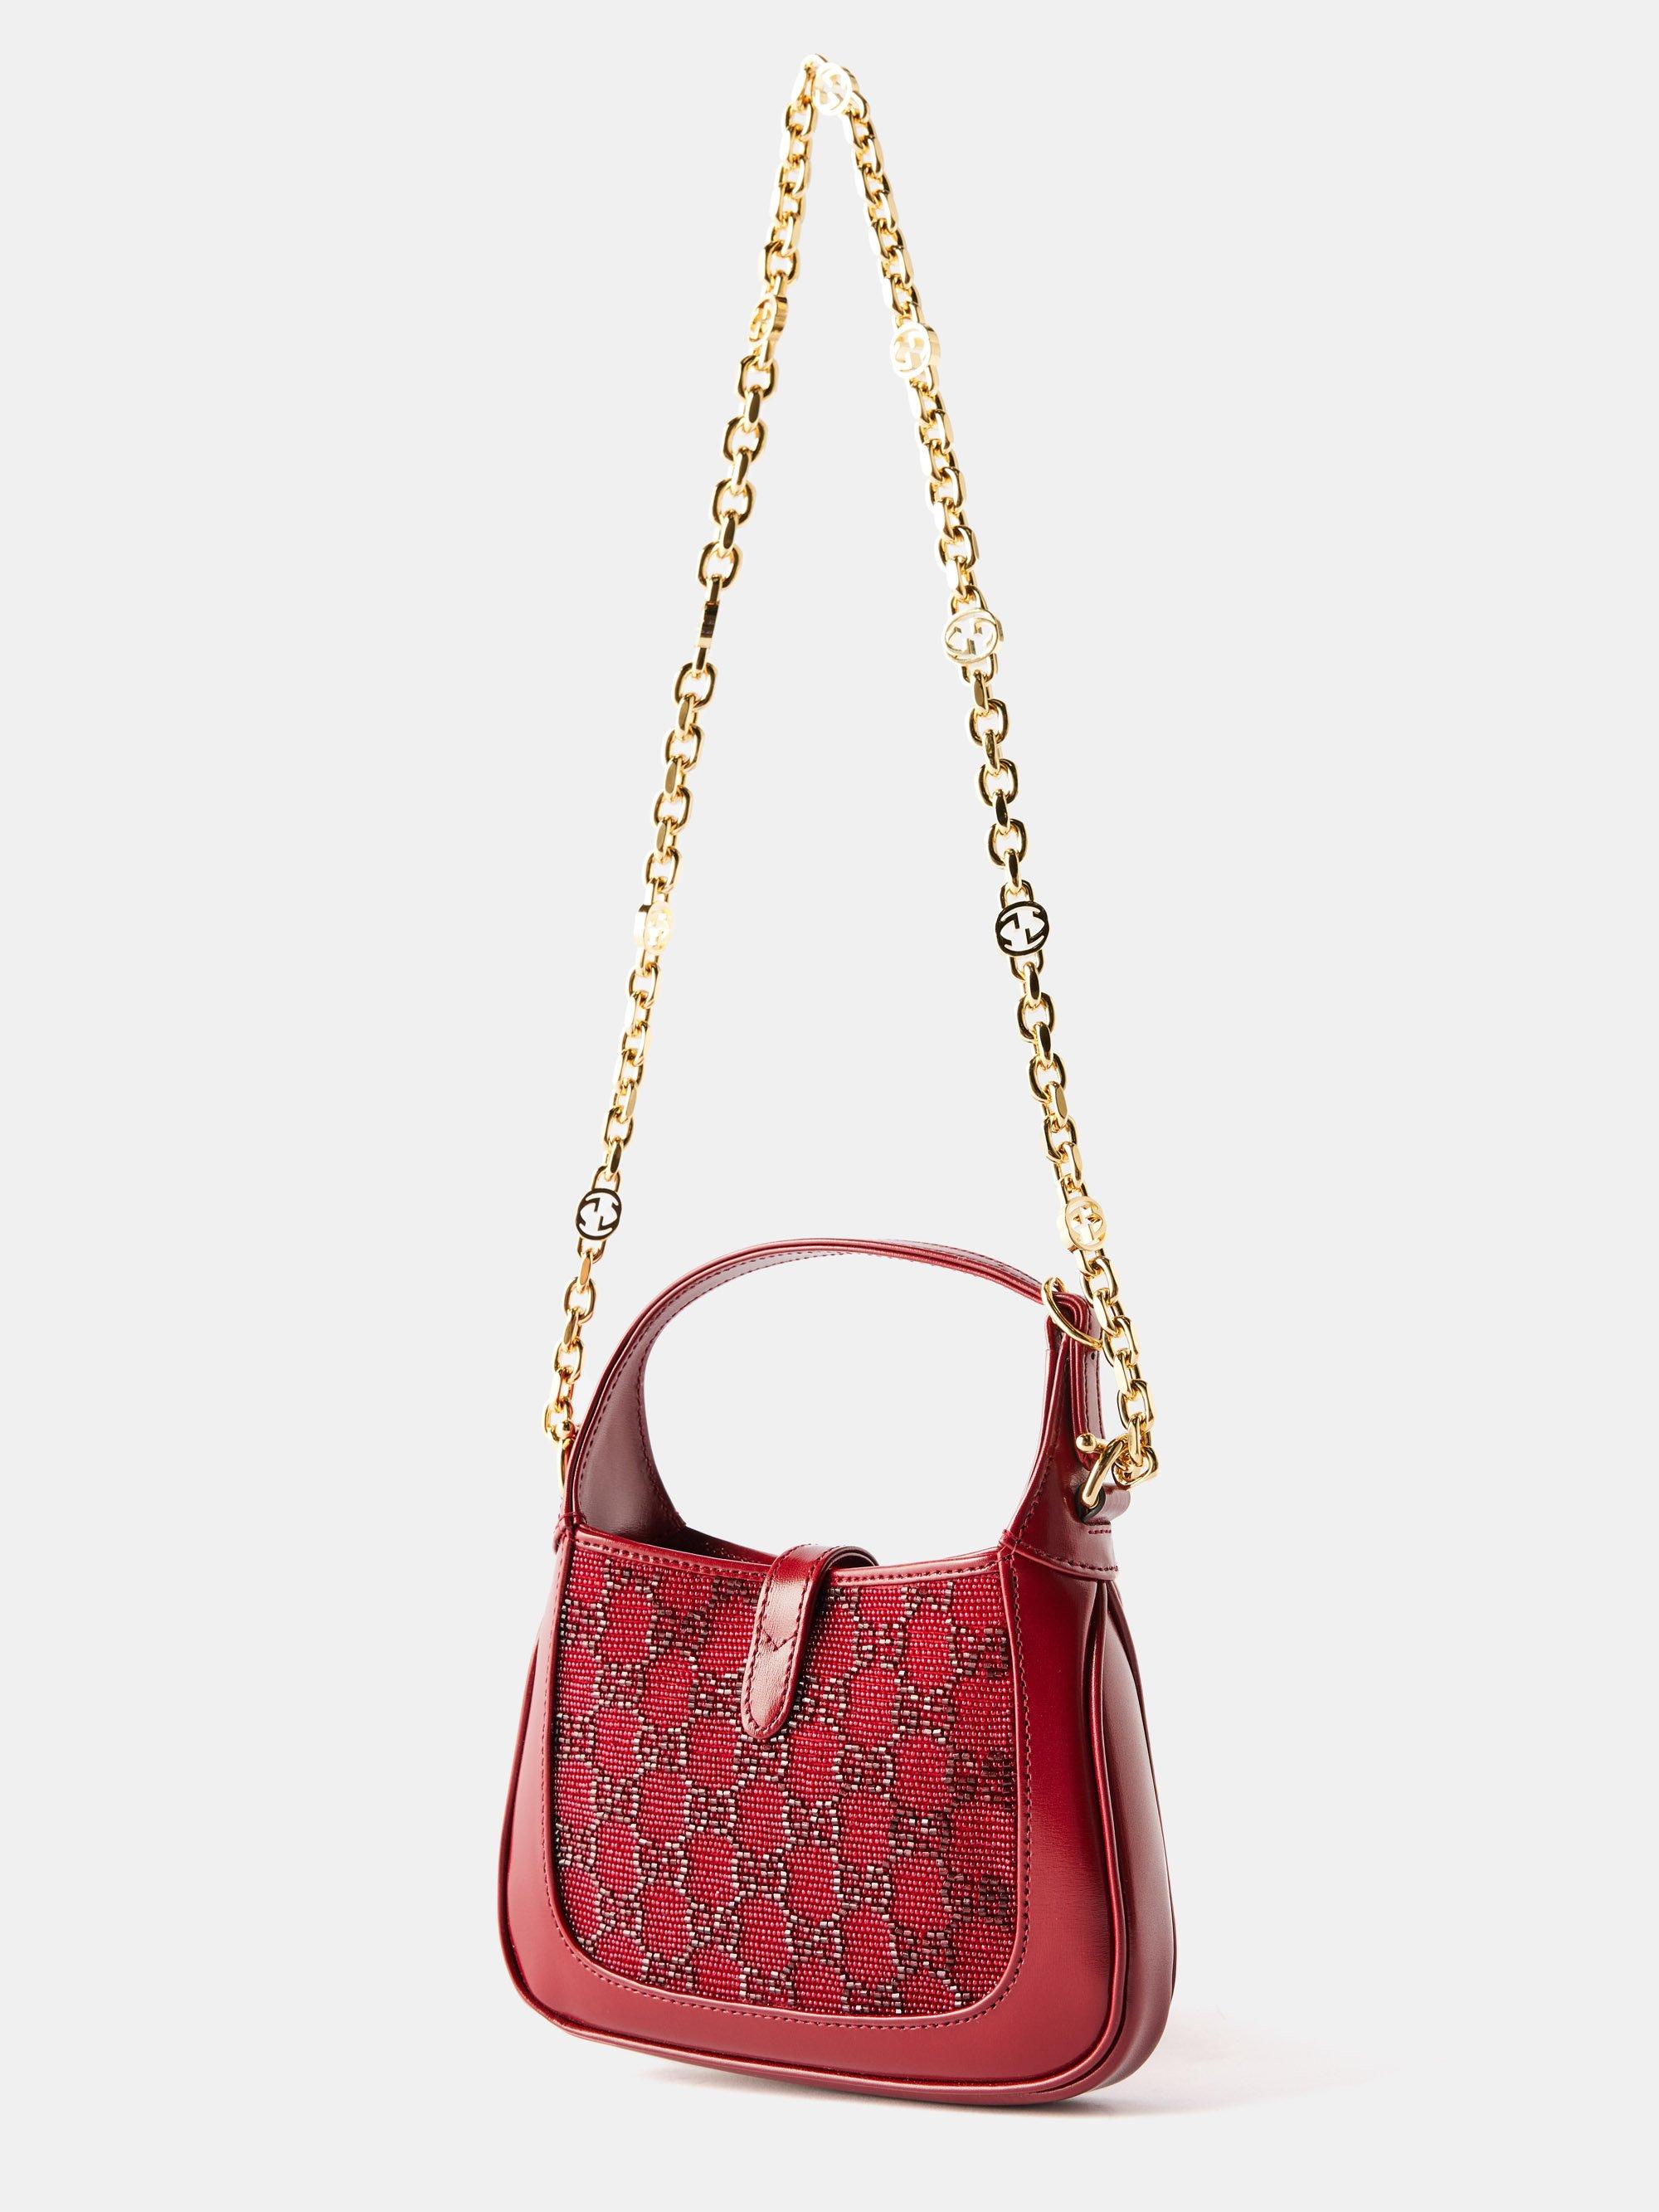 Gucci Jackie 1961 Small Beaded Leather Shoulder Bag in Red